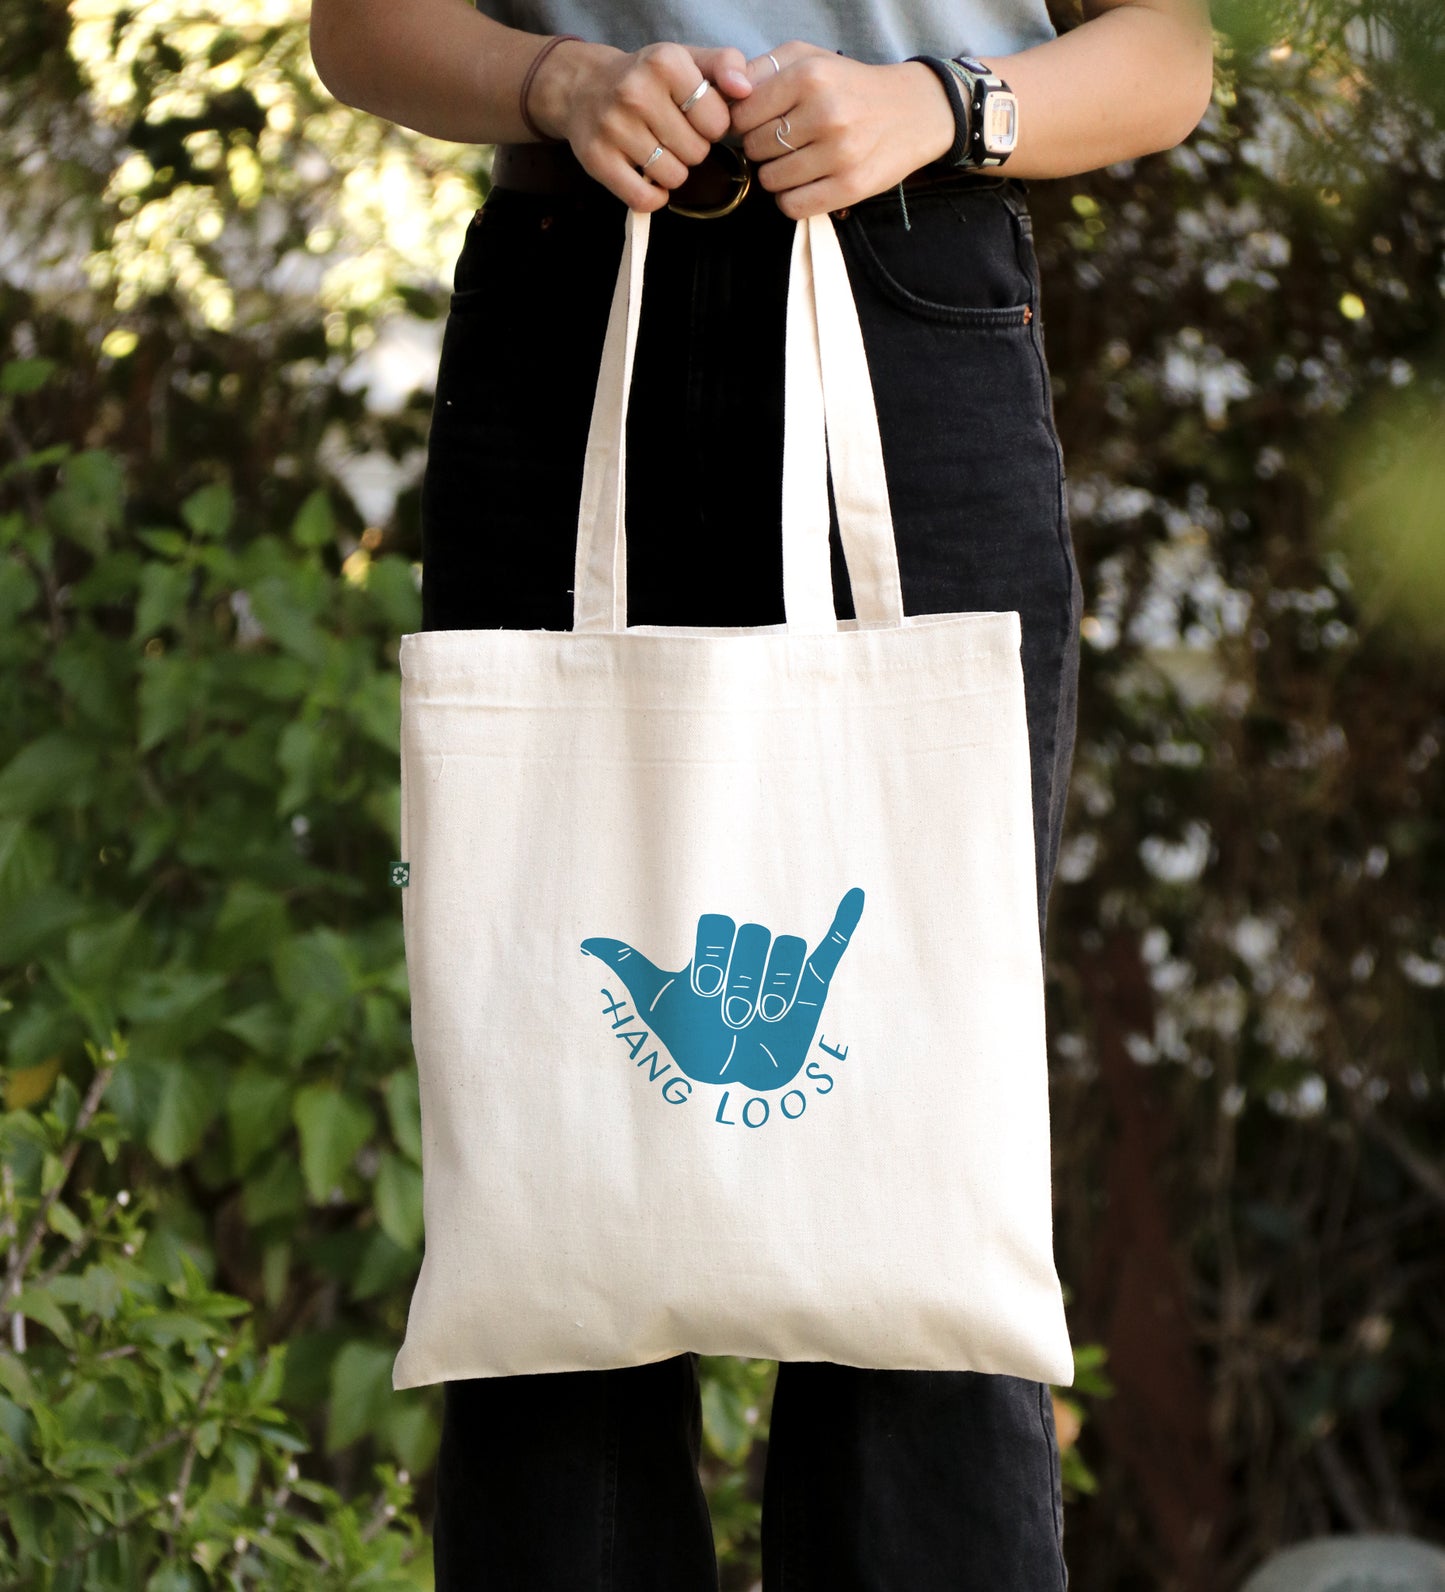 Hang Loose - Canvas Tote Bag - Recycled Cotton